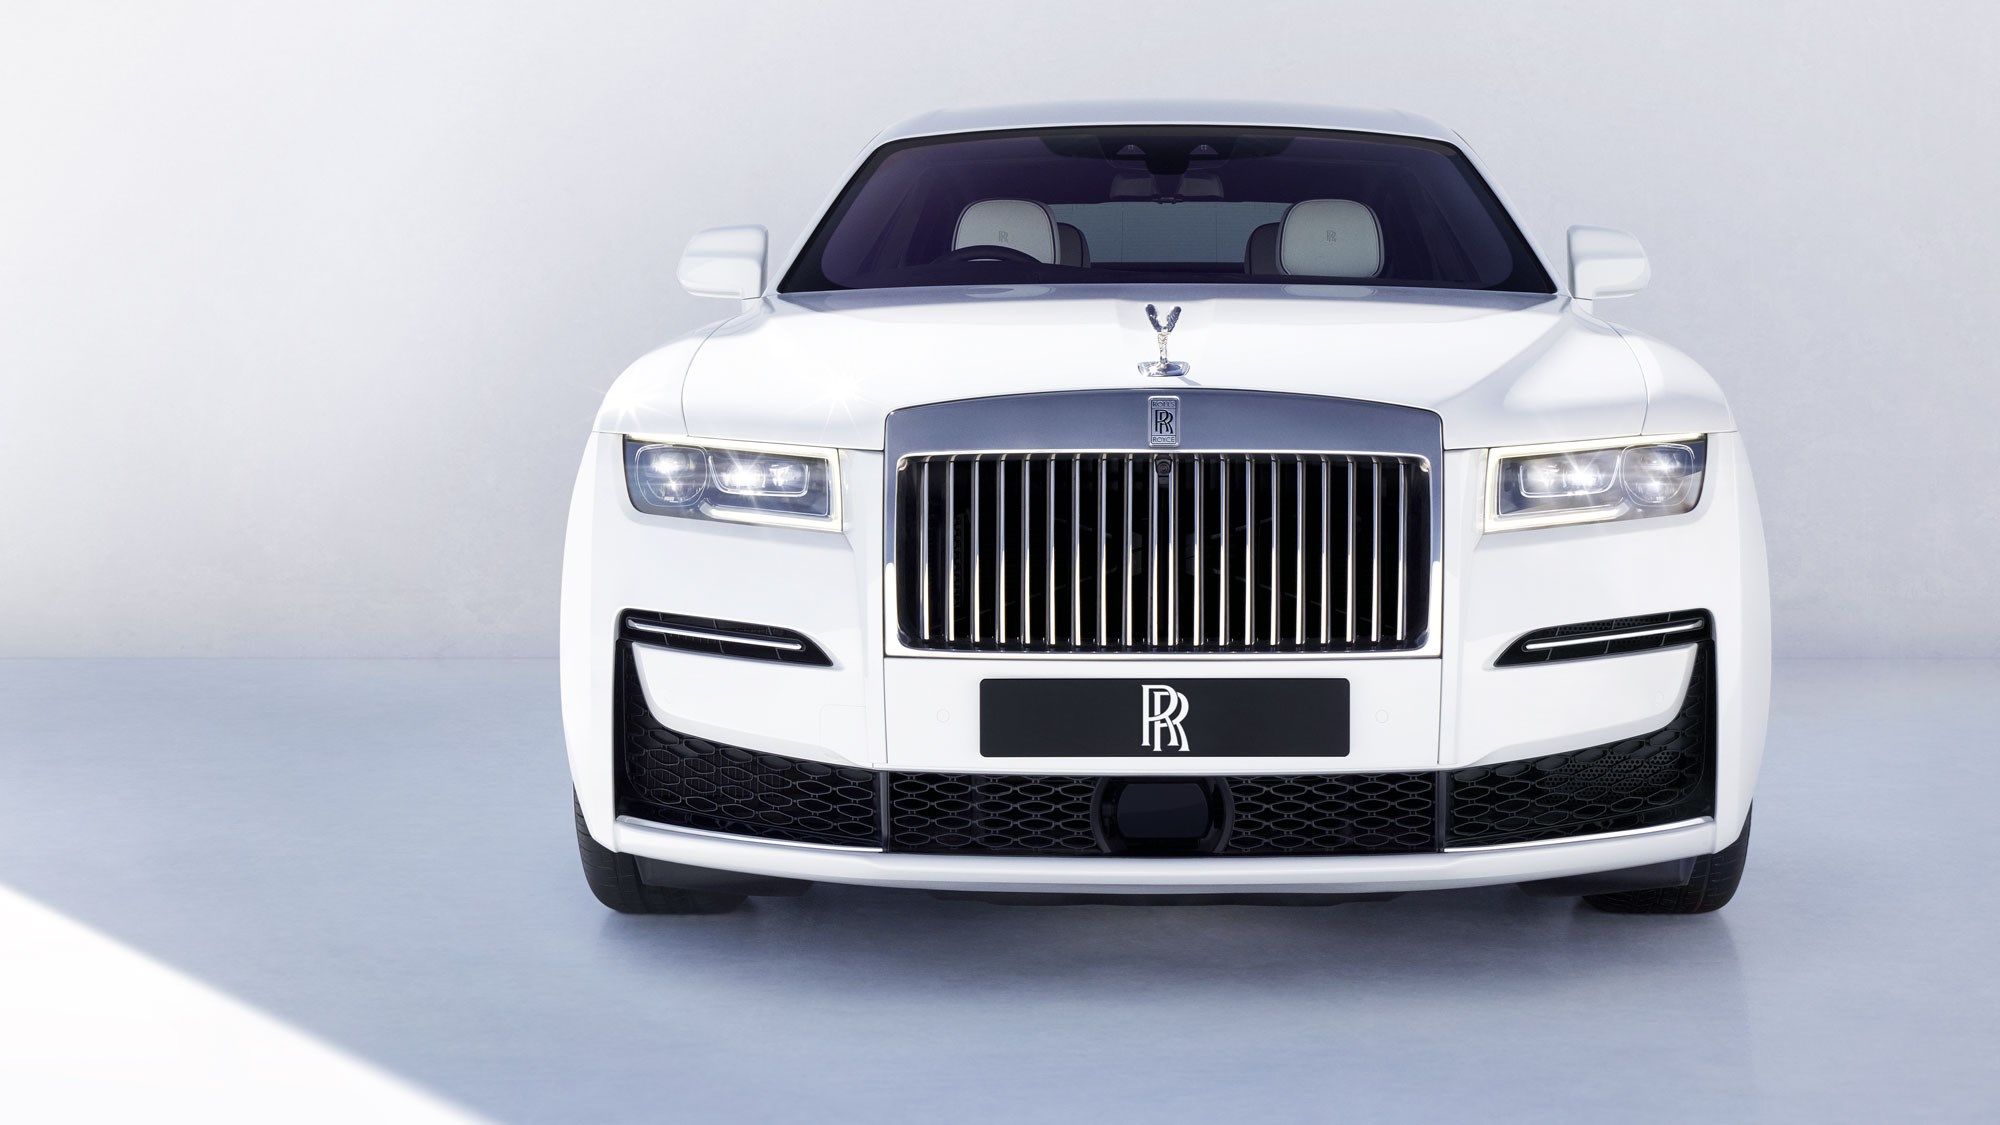 The Intersection of Minimalism and Luxury: The New Rolls-Royce Ghost